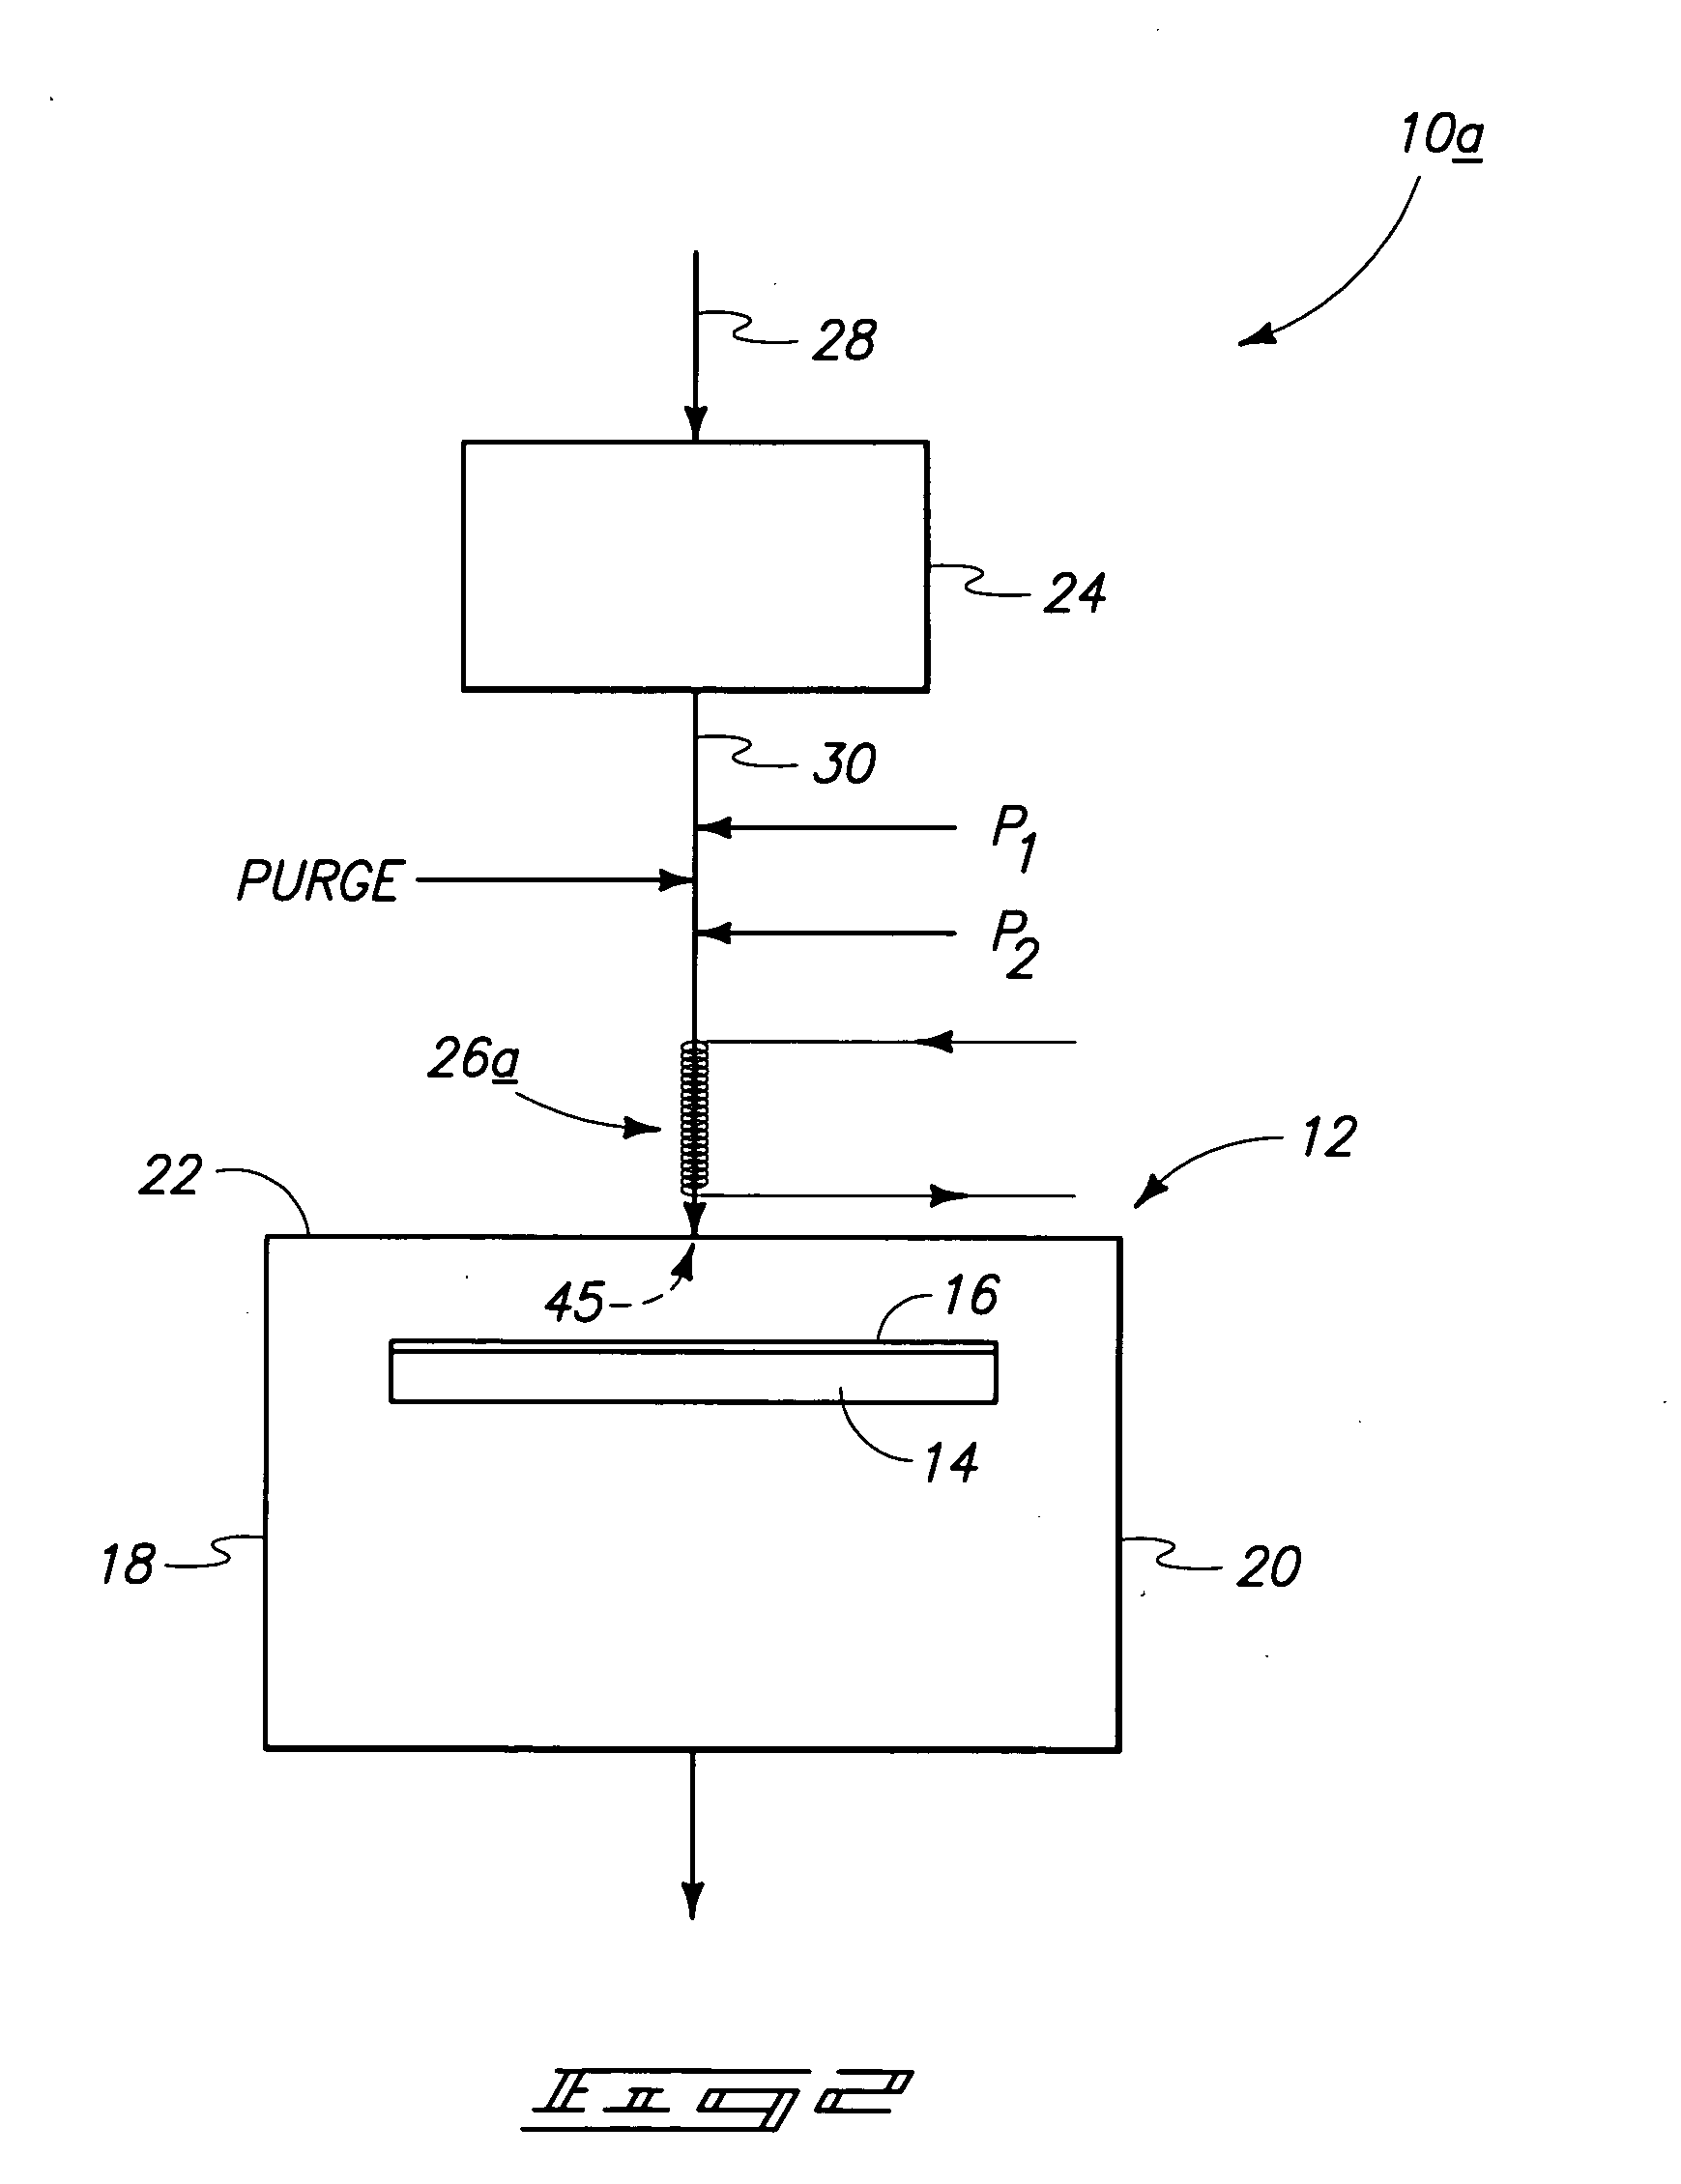 Atomic layer deposition method of forming an oxide comprising layer on a substrate